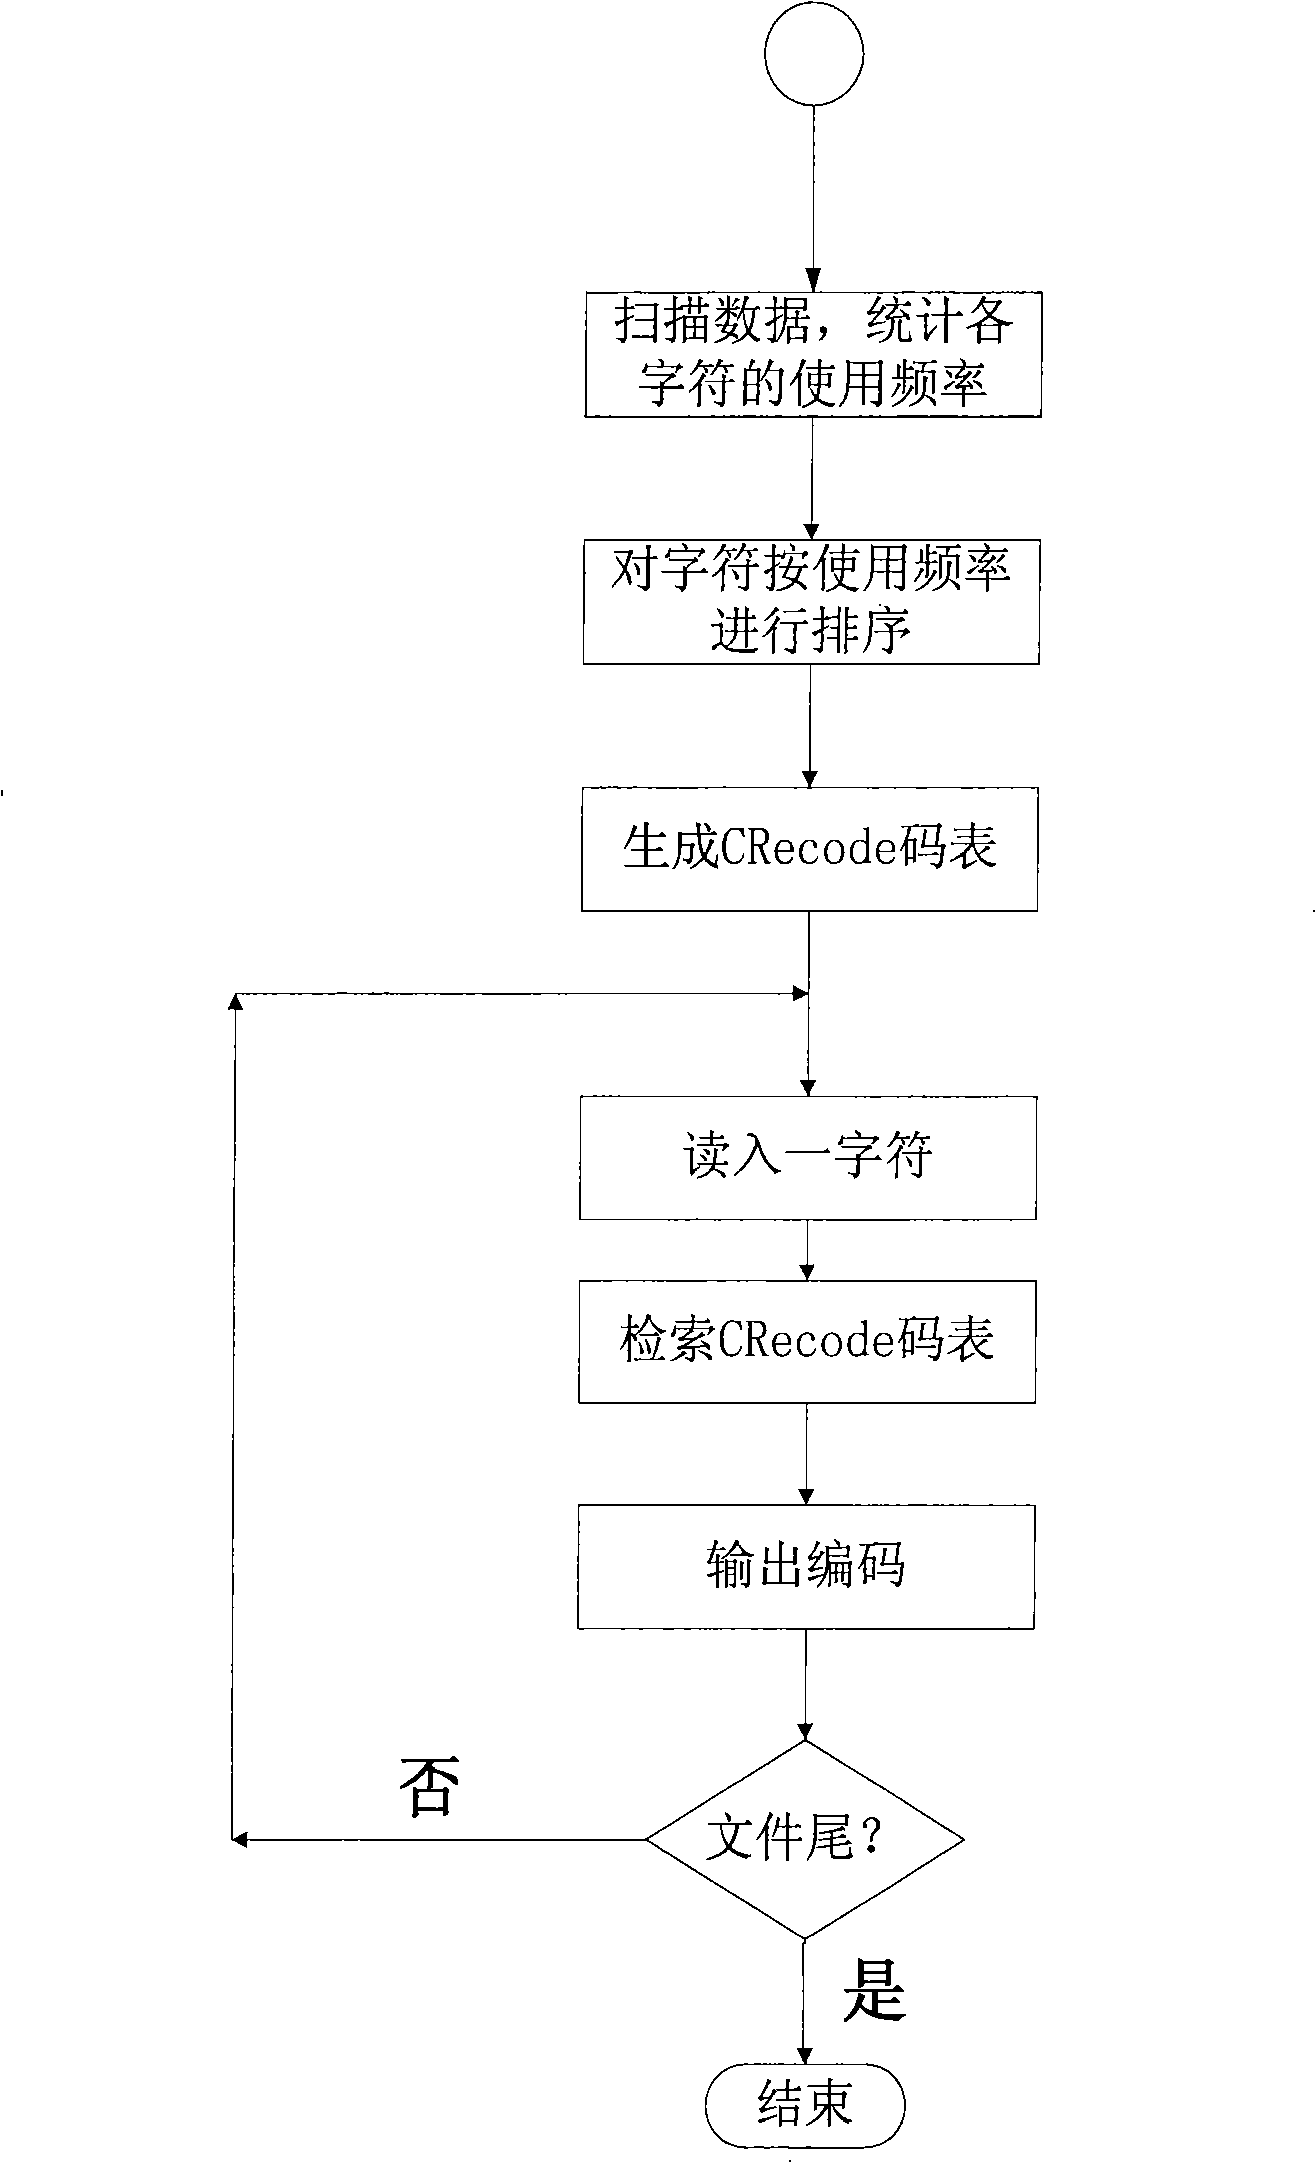 Method for compressing Chinese text supporting ANSI encode